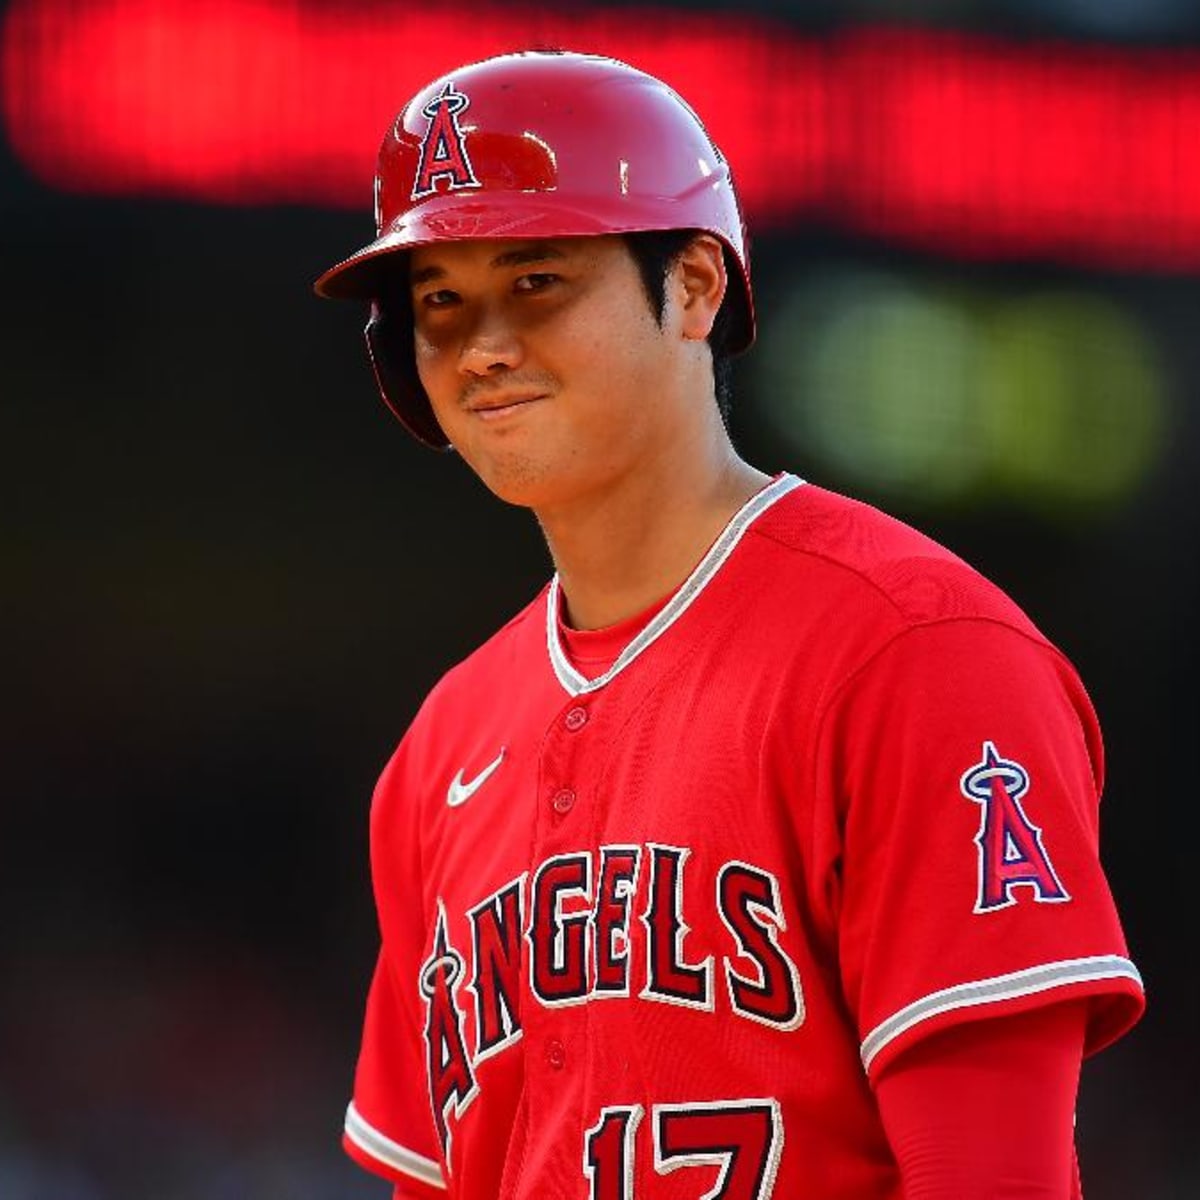 Could Yankees Actually Acquire Angels Star Shohei Ohtani? Here's